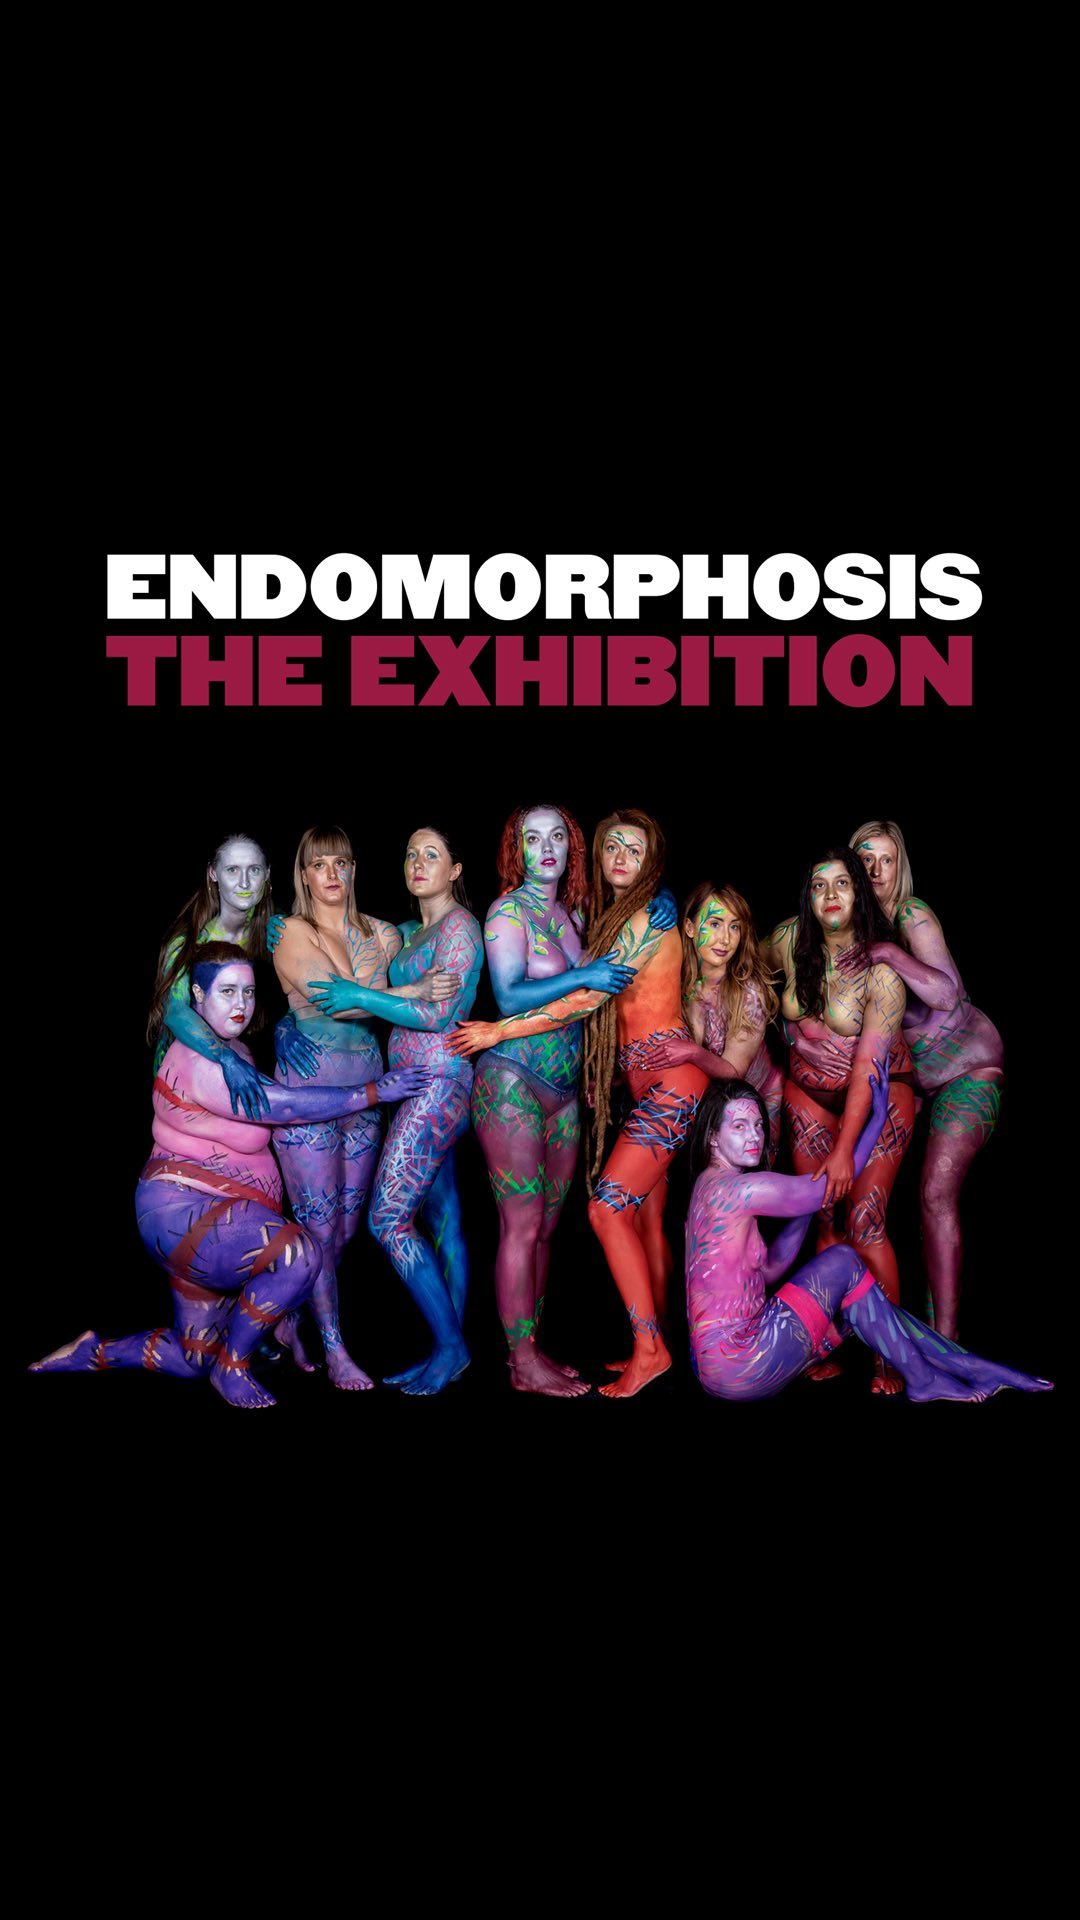 Endomorphosis: The Exhibition!

We are delighted to announce our first ever exhibition to kick off 2023.

Join us from 4 February – 25 March 2023 at @galleryoldham for our first Endomorphosis Exhibition, raising awareness of Endometriosis using body paint as a tool for well-being and empowerment.

We’ll be displaying 10 powerful images we captured in March 2022 + more!

The exhibition is in Gallery 4 which is free and open to the public.

[Find out more in the link in our bio about the exhibition and our project]

We’ll be announcing soon how you can get involved in being a participant for our 2023 group as part of Endometriosis Awareness Month 2023.

#Endomorphosis #Cabasa #Endometriosis #GalleryOldham #BodyPainting #Exhibition #EndoWarriors #EndometriosisAwareness